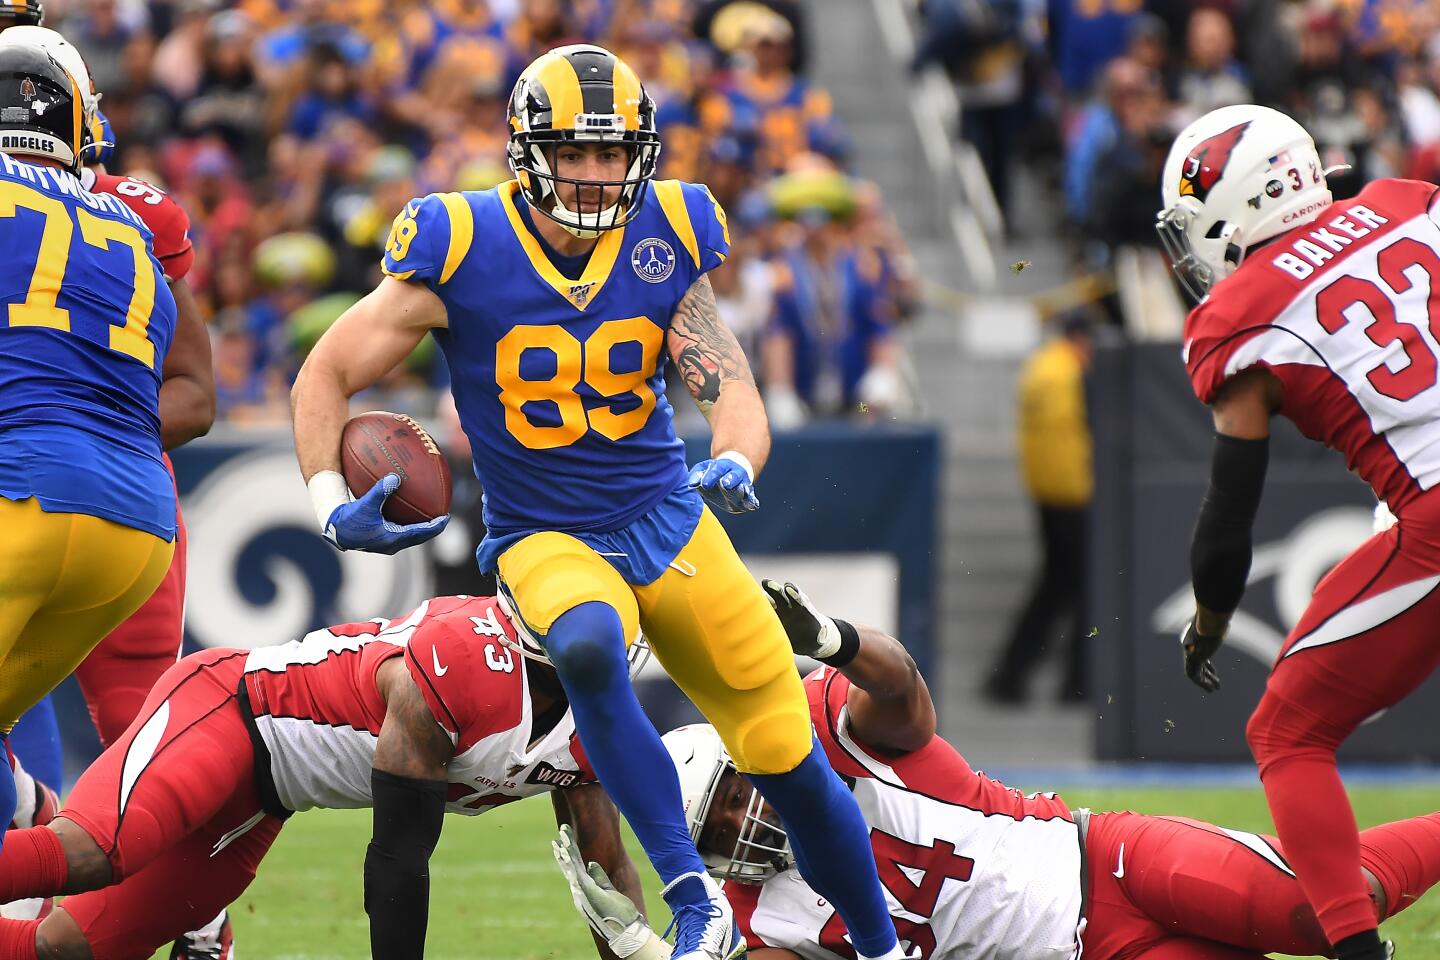 Rams tight end Tyler Higbee runs with the ball against the Arizona Cardinals in the second quarter.